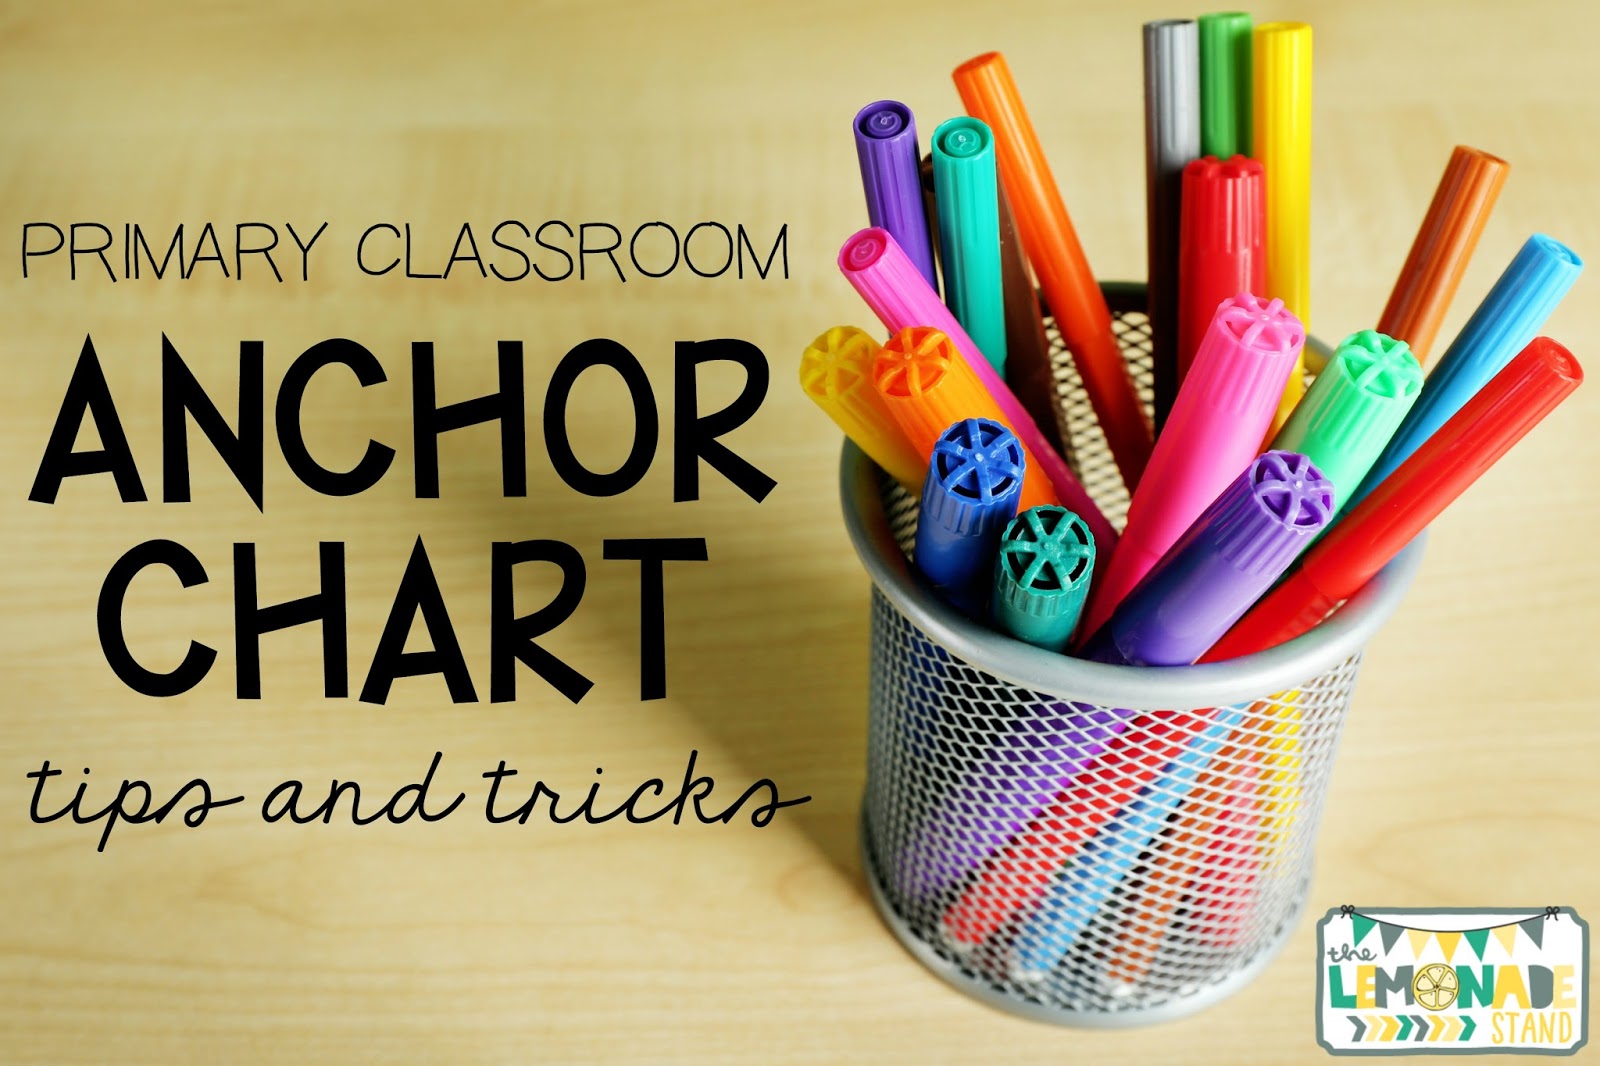 Anchor Chart Tips and Tricks for the Primary Classroom